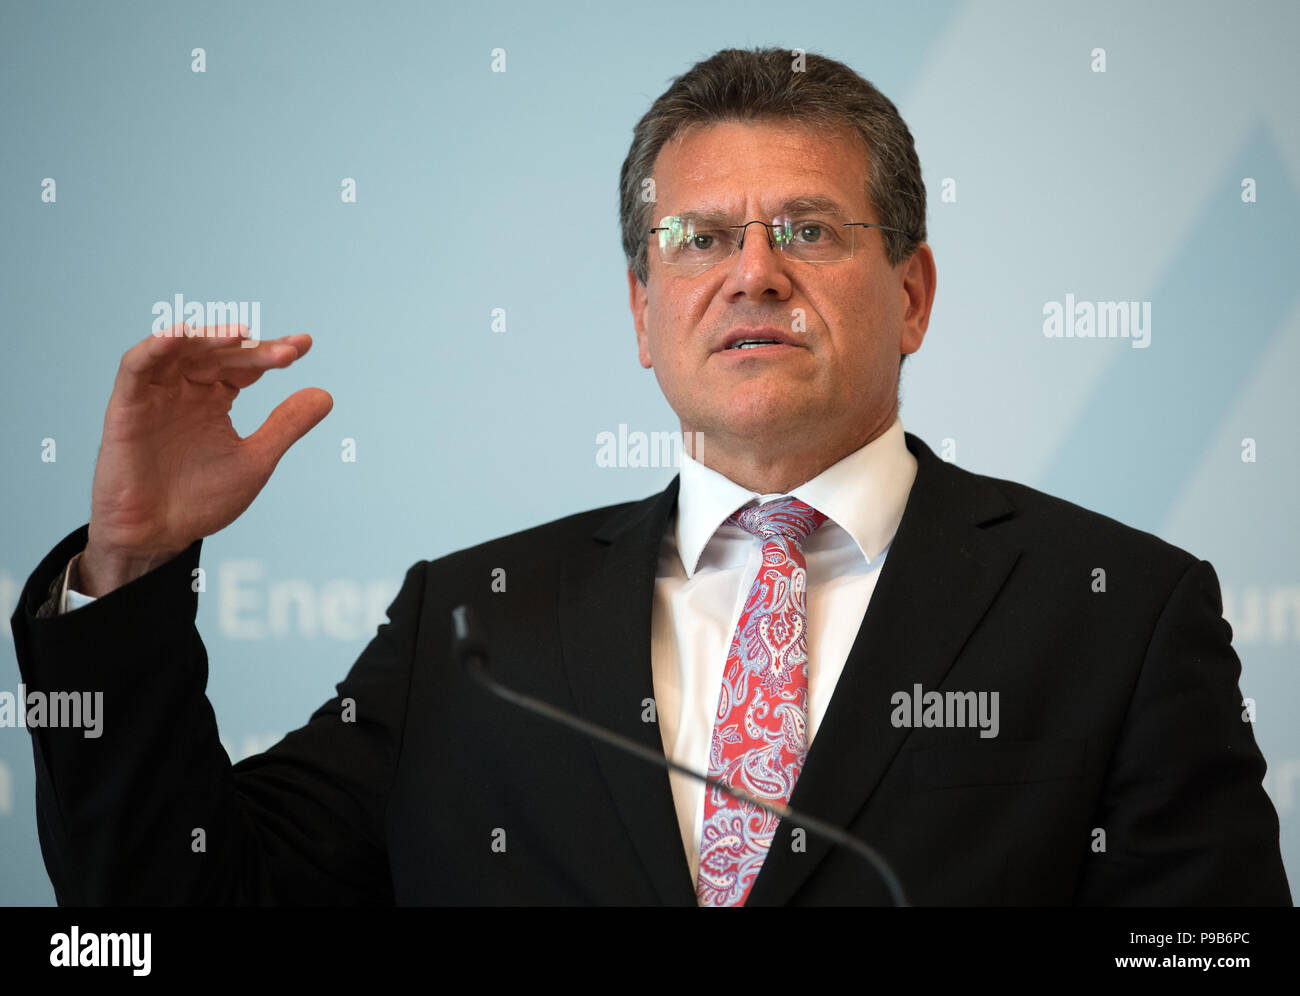 Berlin, Germany. 17th July, 2018. Maros Sefcovic, European Commissioner for the Energy Union, delivers a speech during a joint press conference with Altmaier, German Minister for Economic Affairs and Energy. Credit: Soeren Stache/dpa/Alamy Live News Stock Photo